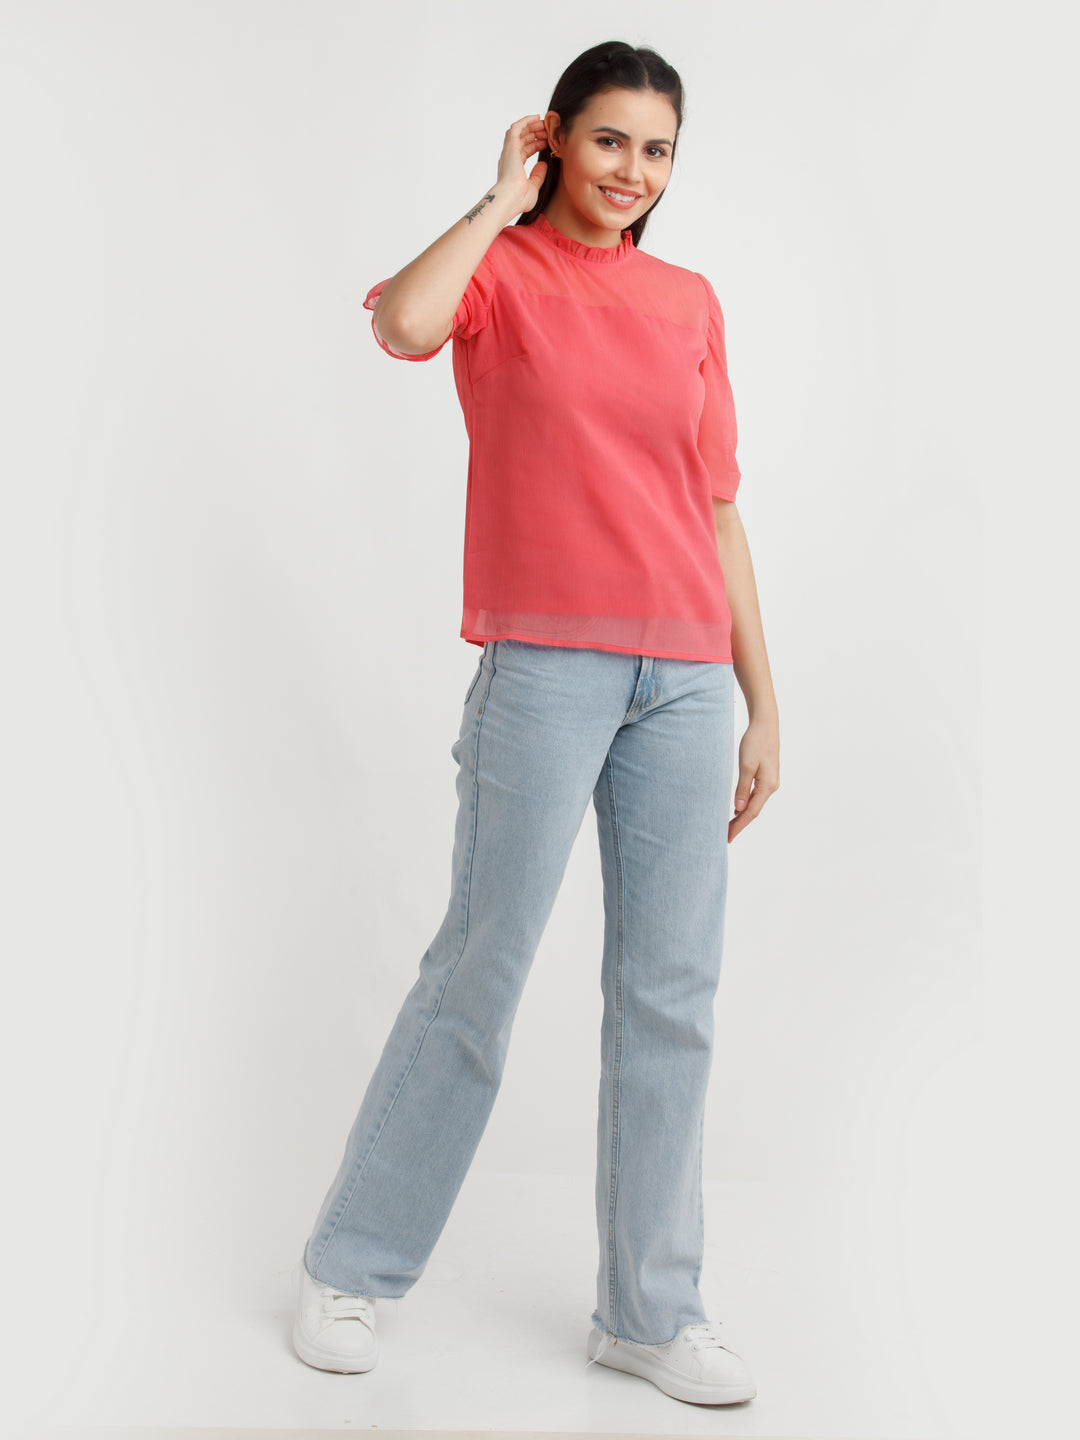 Coral Solid Top For Women